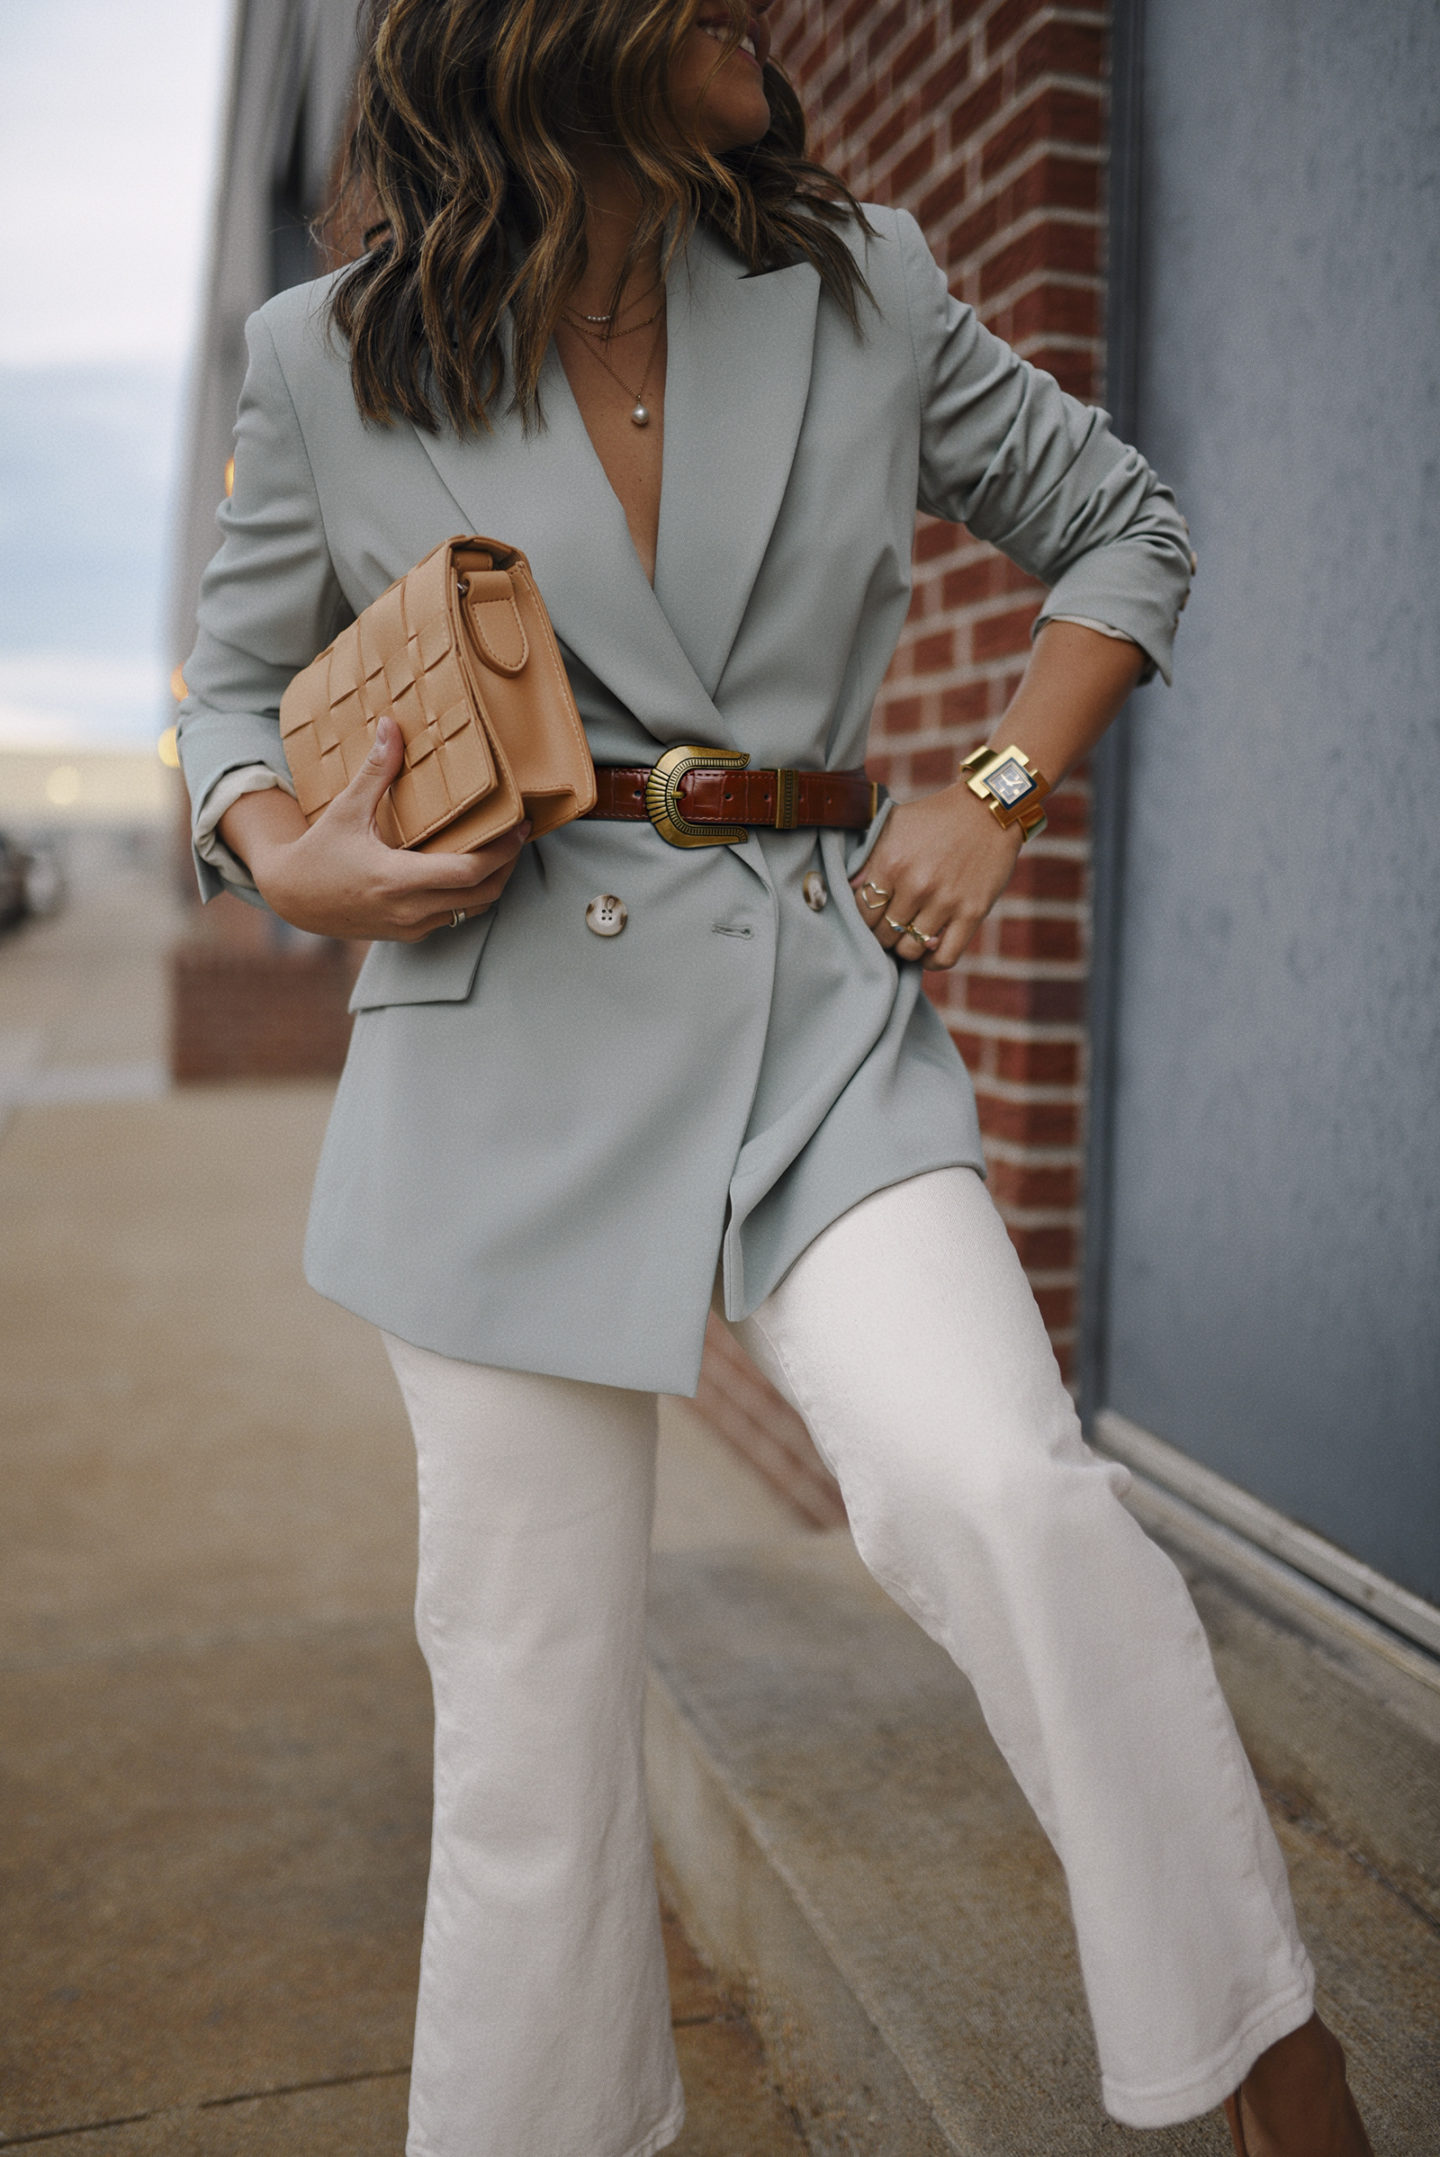 A CHIC WAY TO STYLE WESTERN BELTS, CHIC TALK